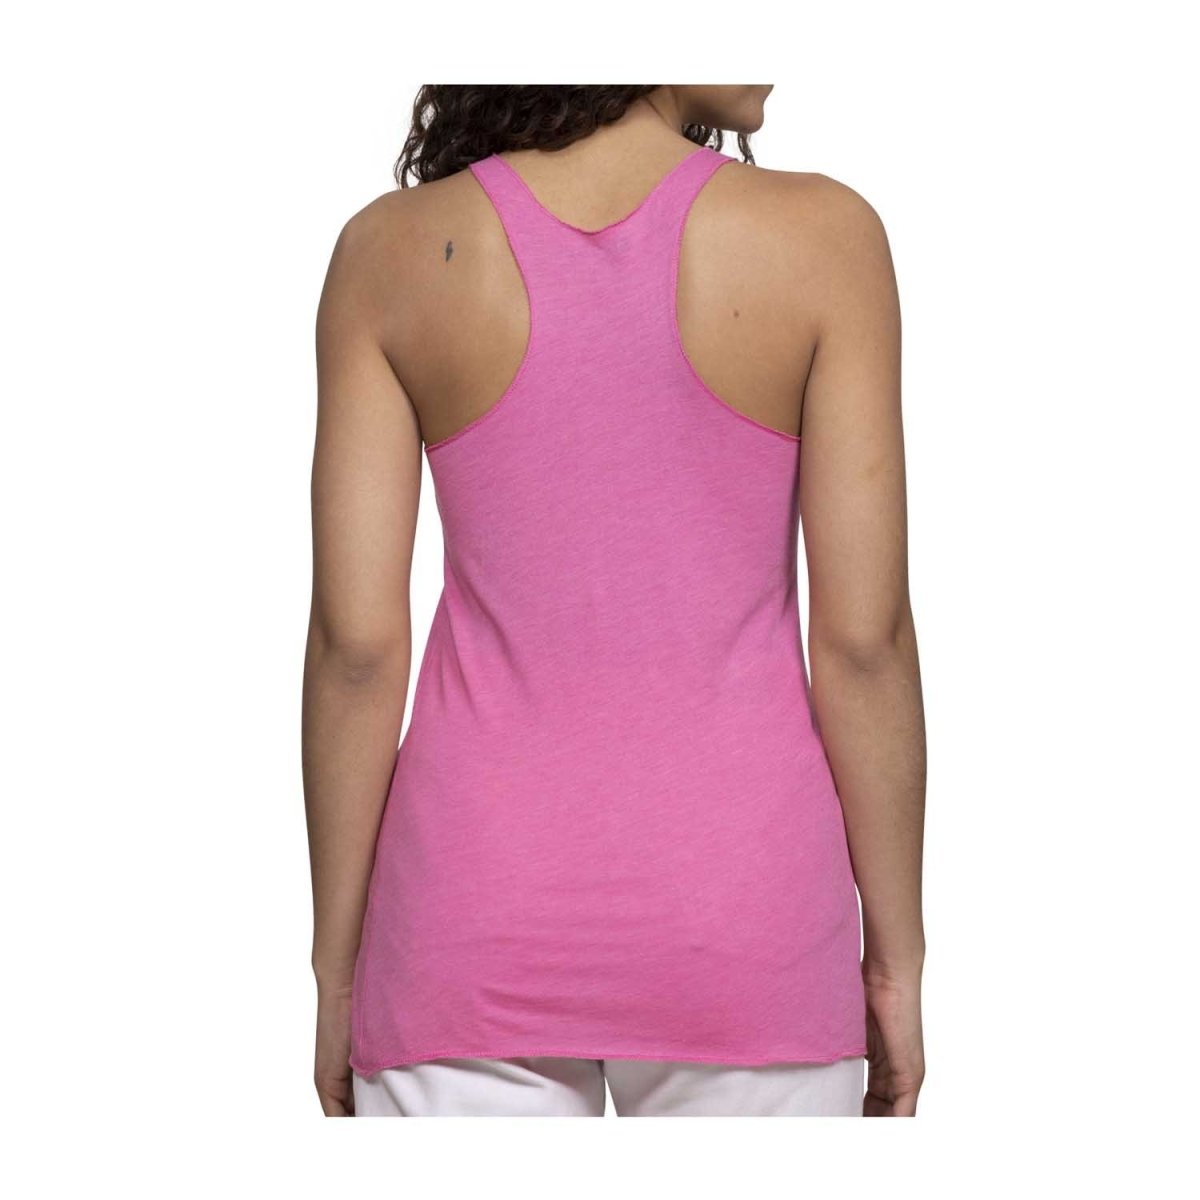 Fitted racerback tank